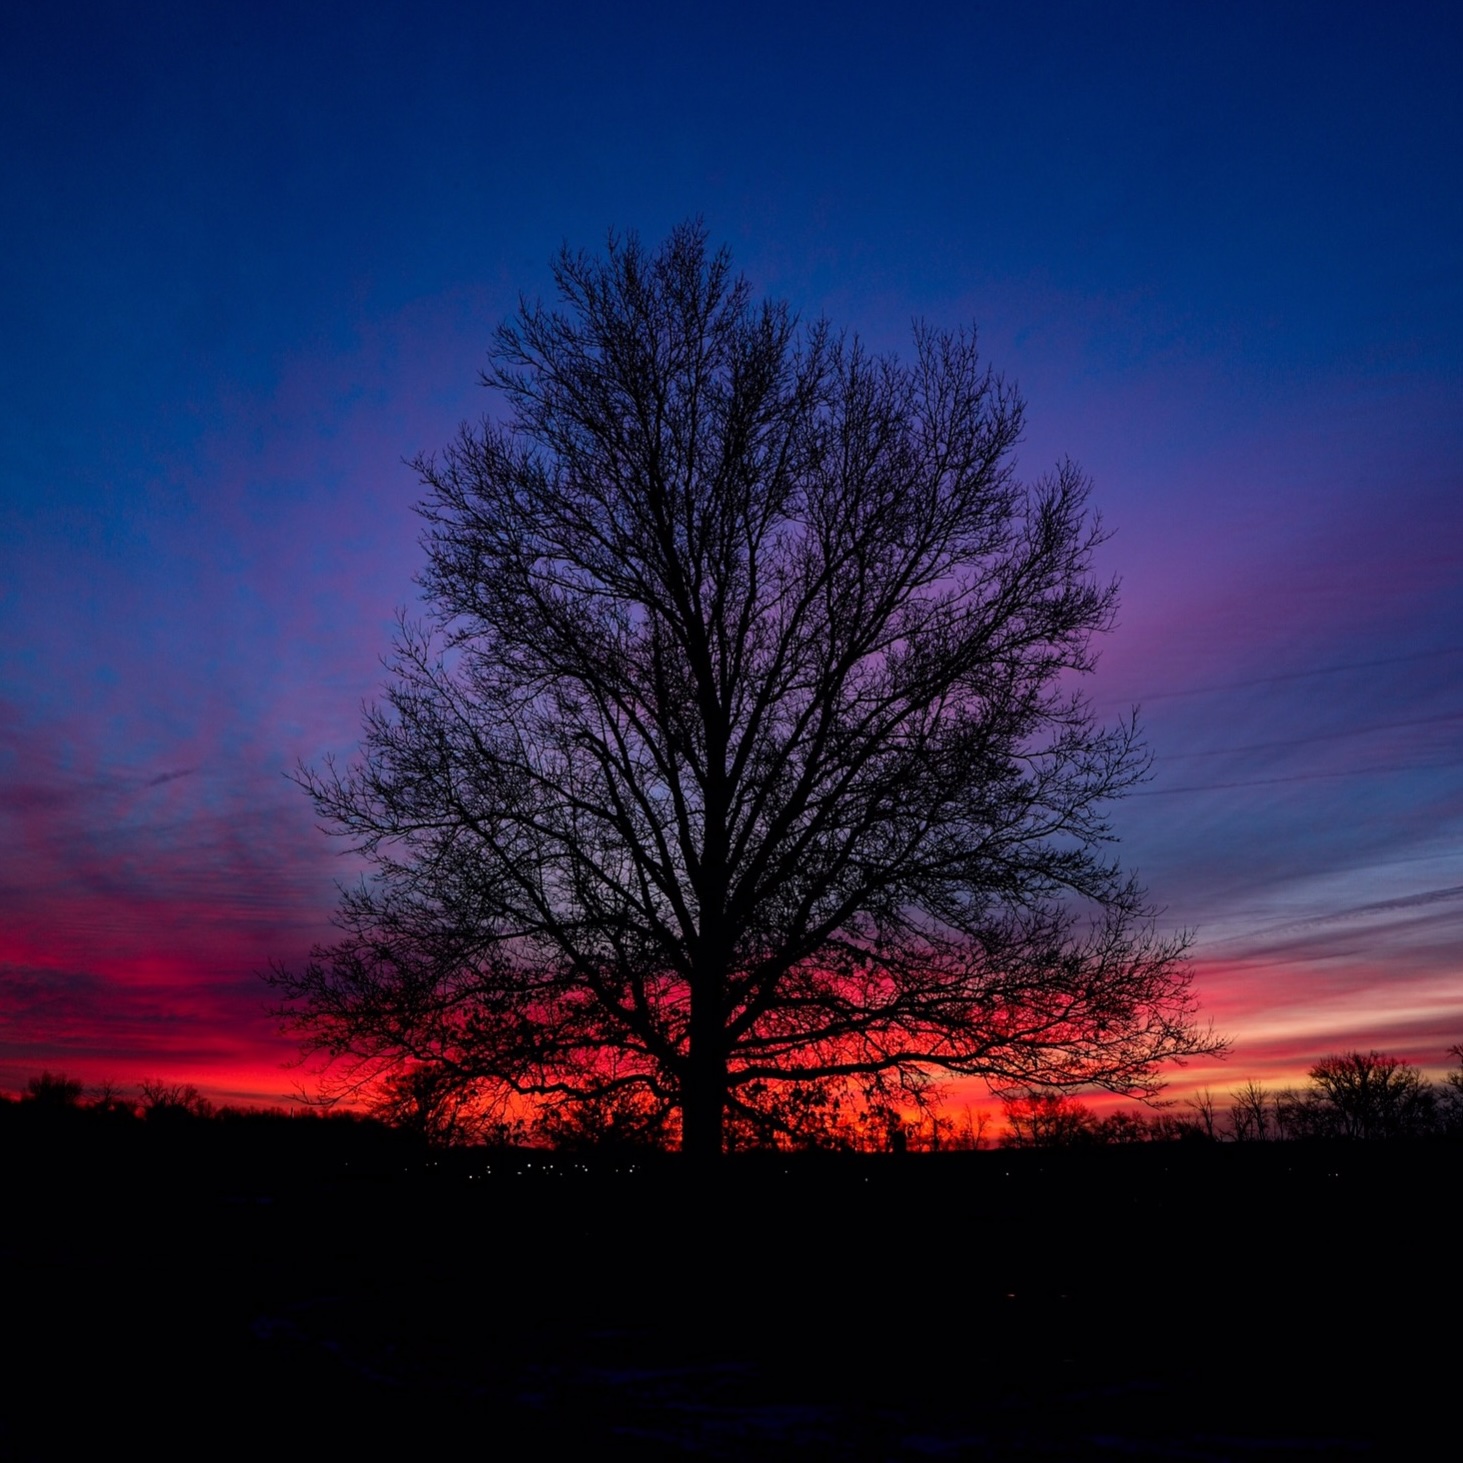 Tree in the foreground against a colorful sunrise.